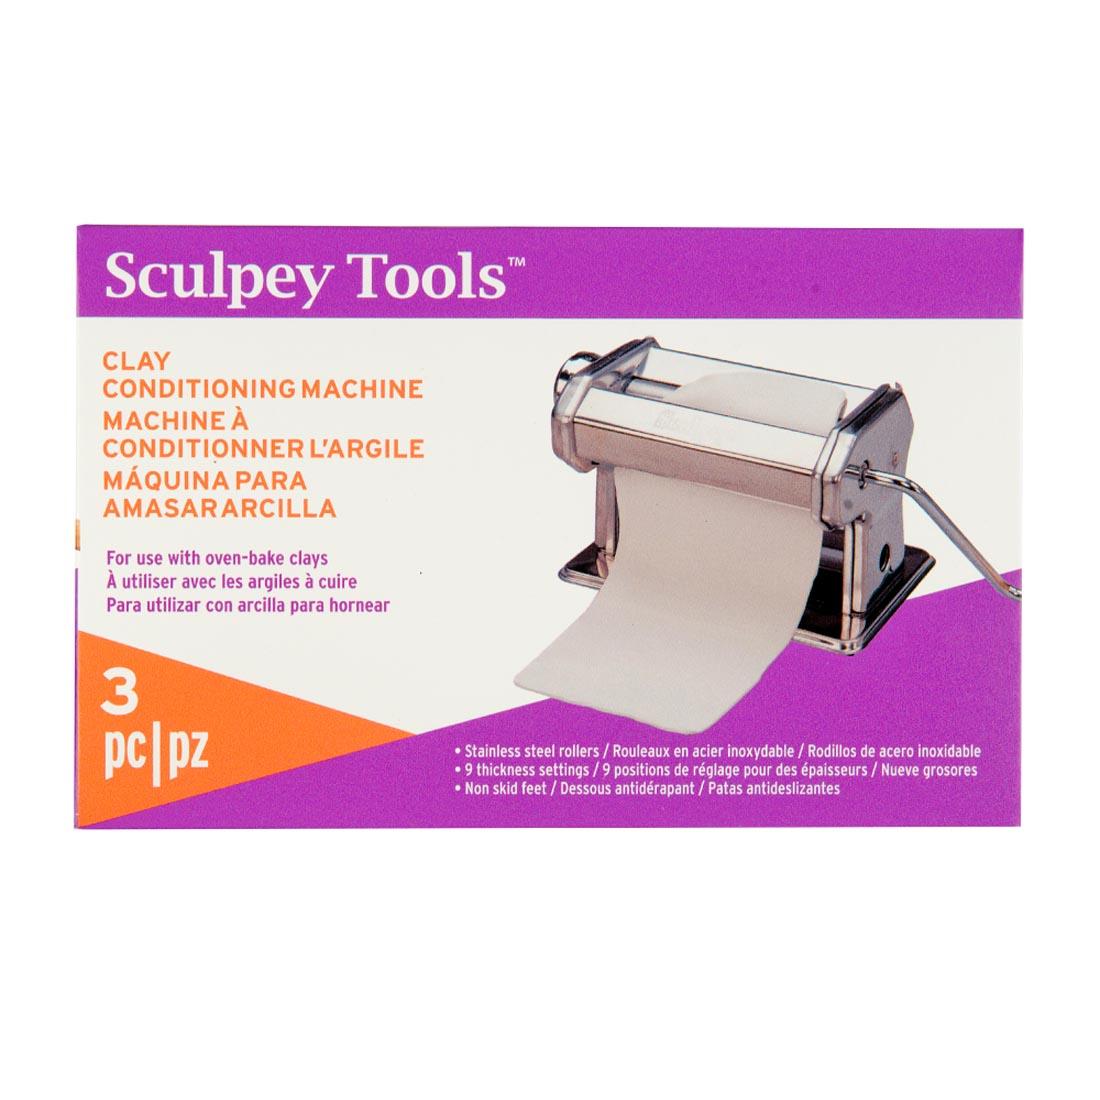 Sculpey Tools Clay Conditioning Machine package